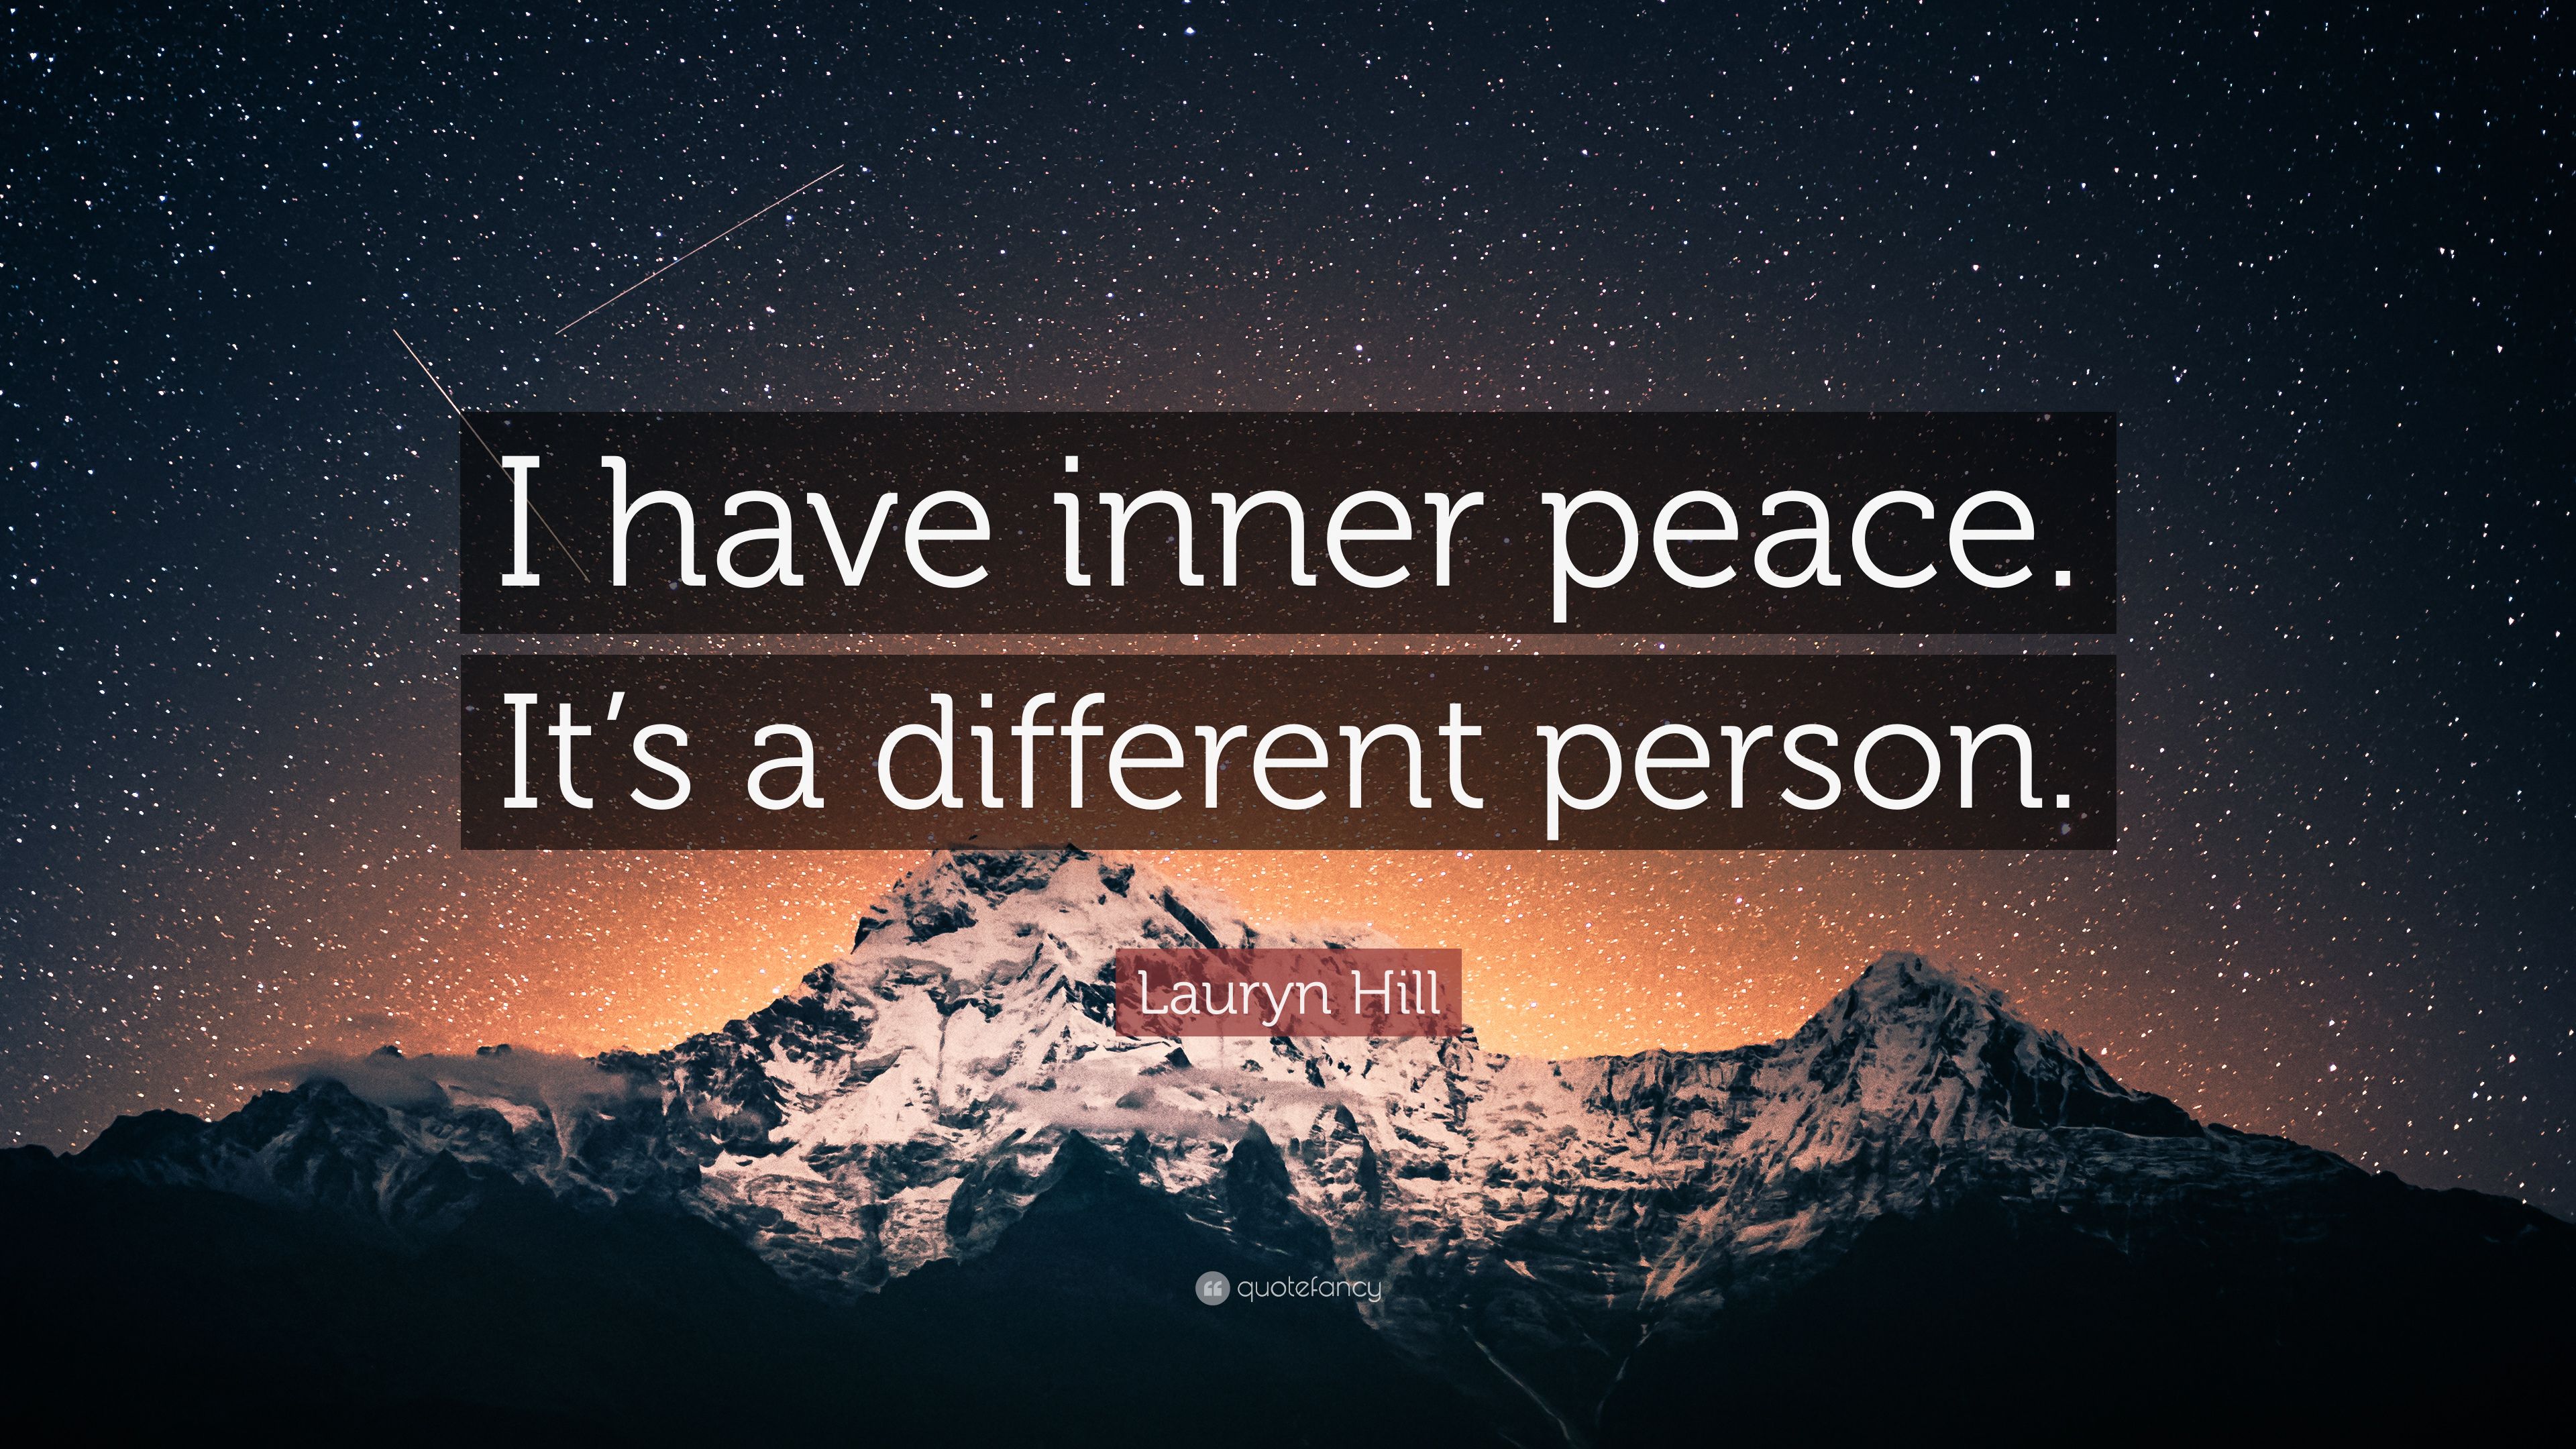 Lauryn Hill Quote: “I have inner peace. It's a different person.” (7 wallpaper)